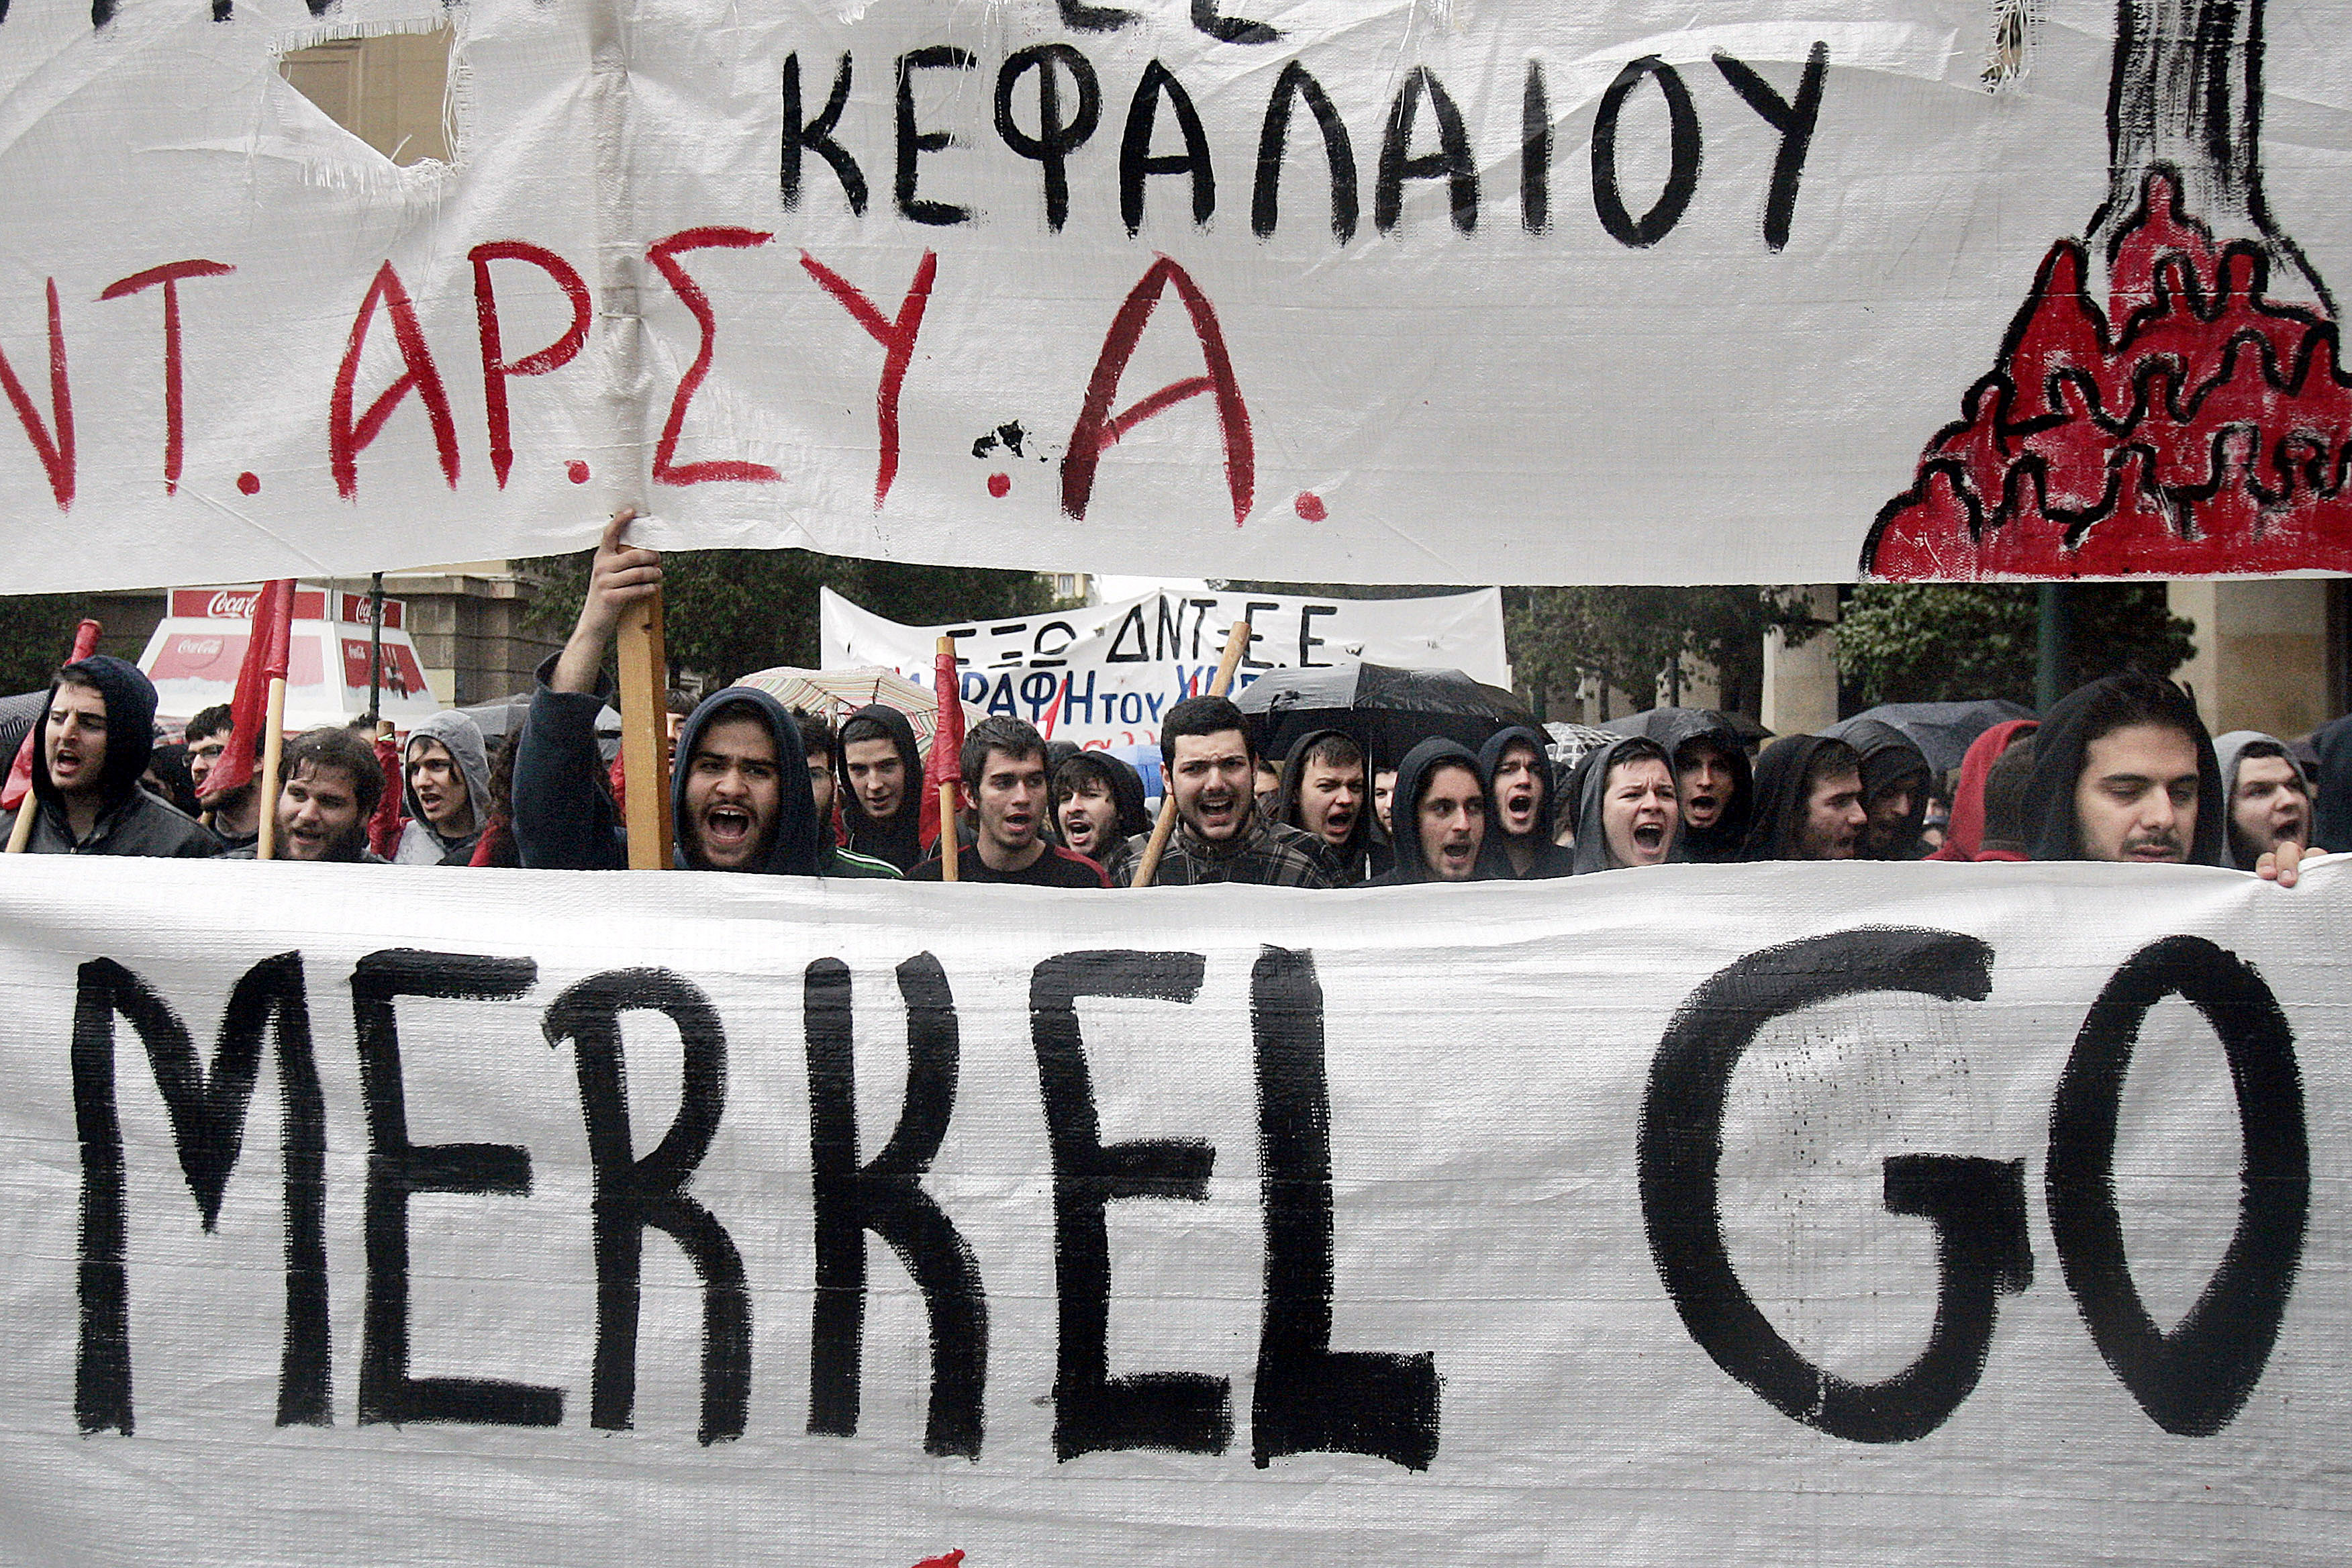 Protesters hold a banner as they march during a demonstration against the visit of Germany's Chancellor Angela Merkel on April 11, 2014 in Athens.